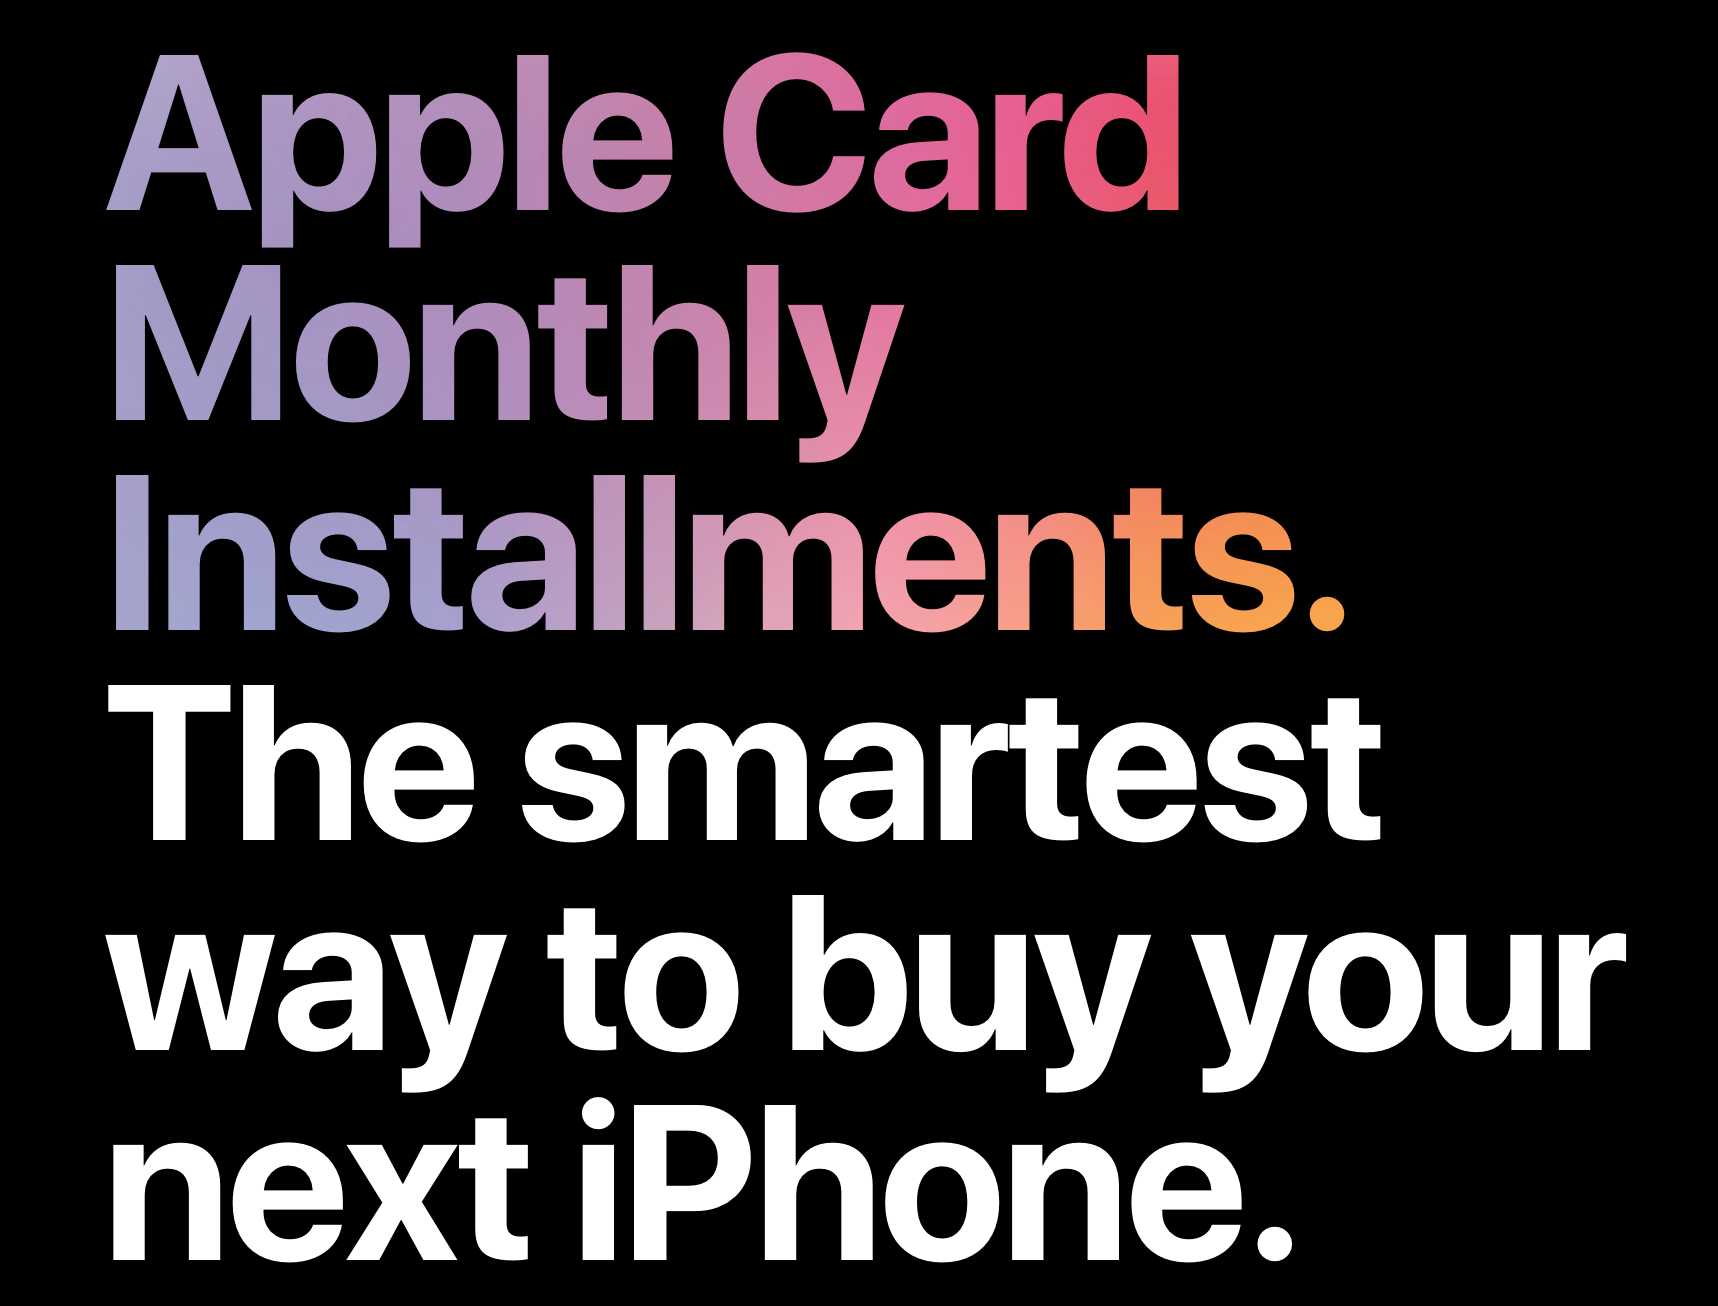 Apple Card monthly installments